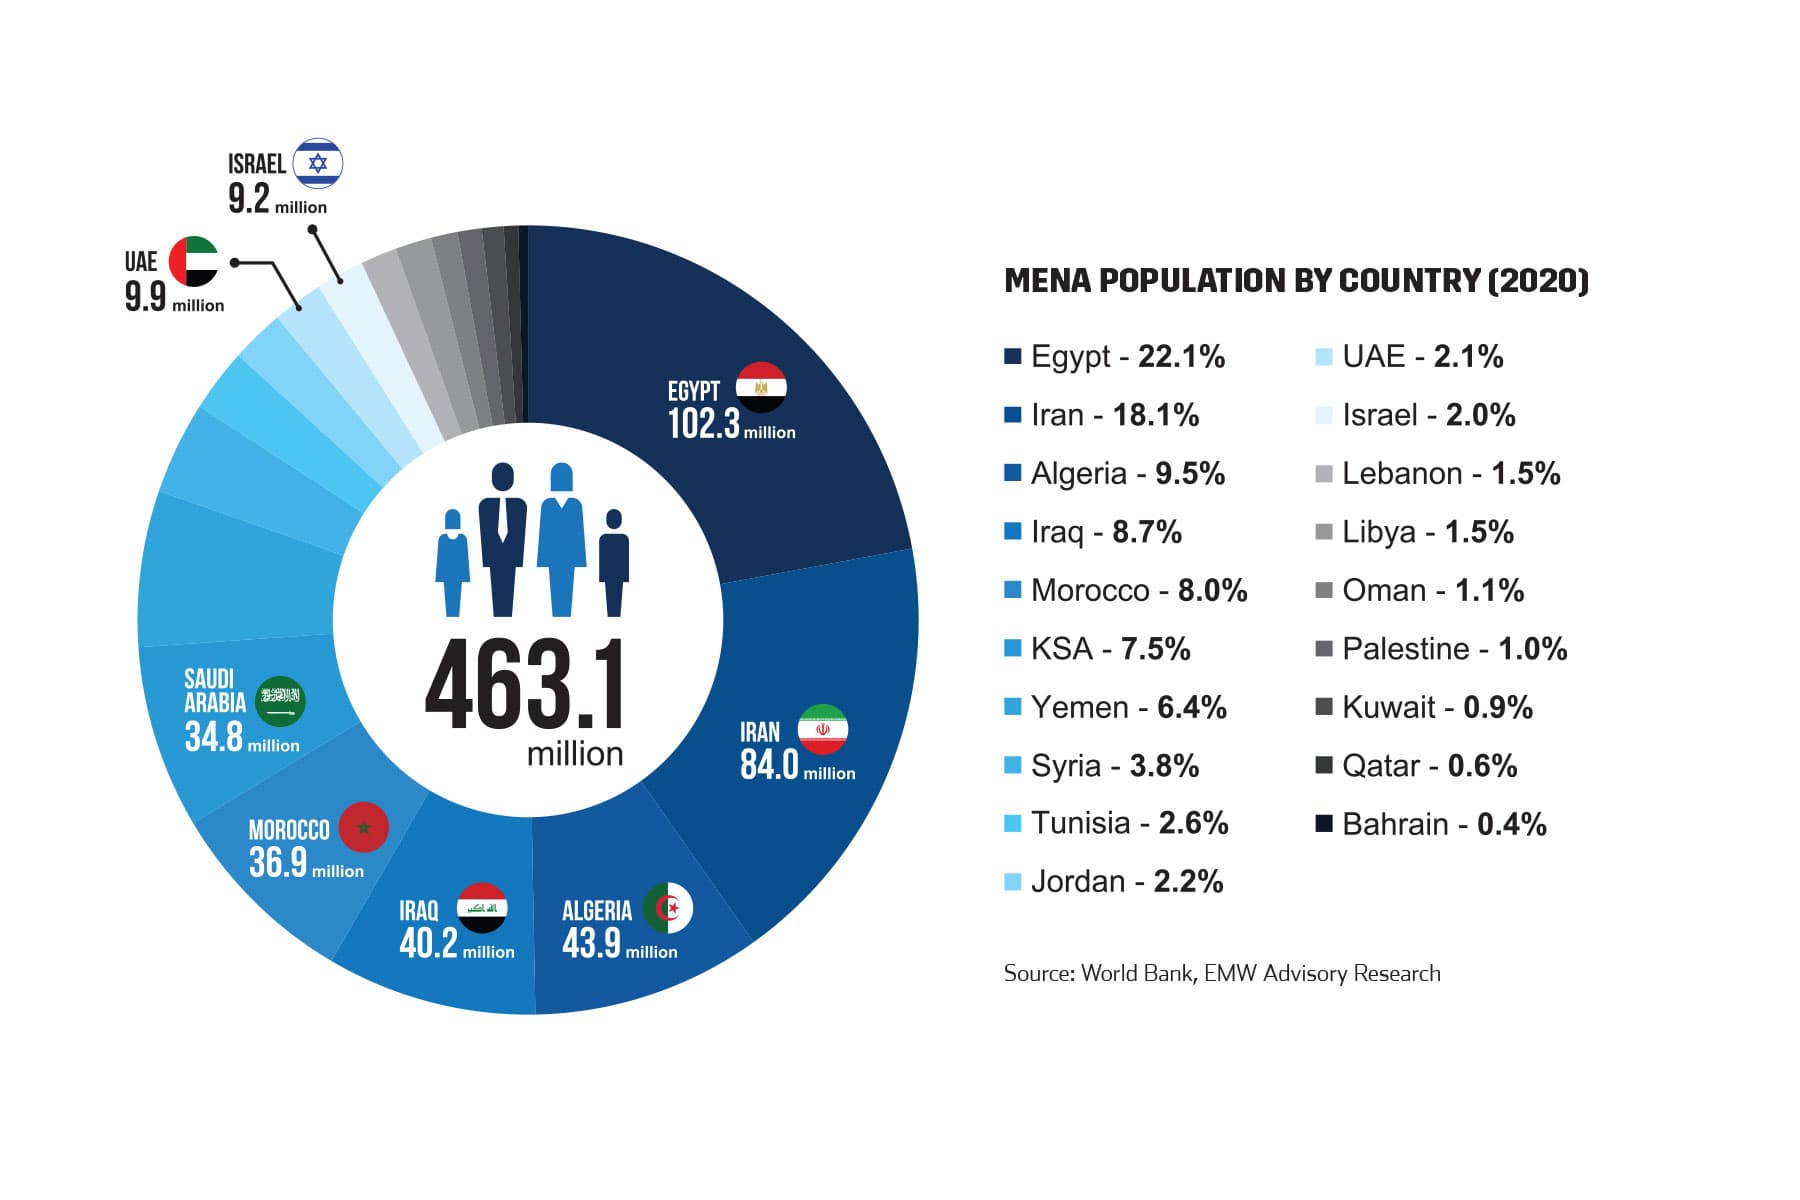 MENA Population by Country (2020)